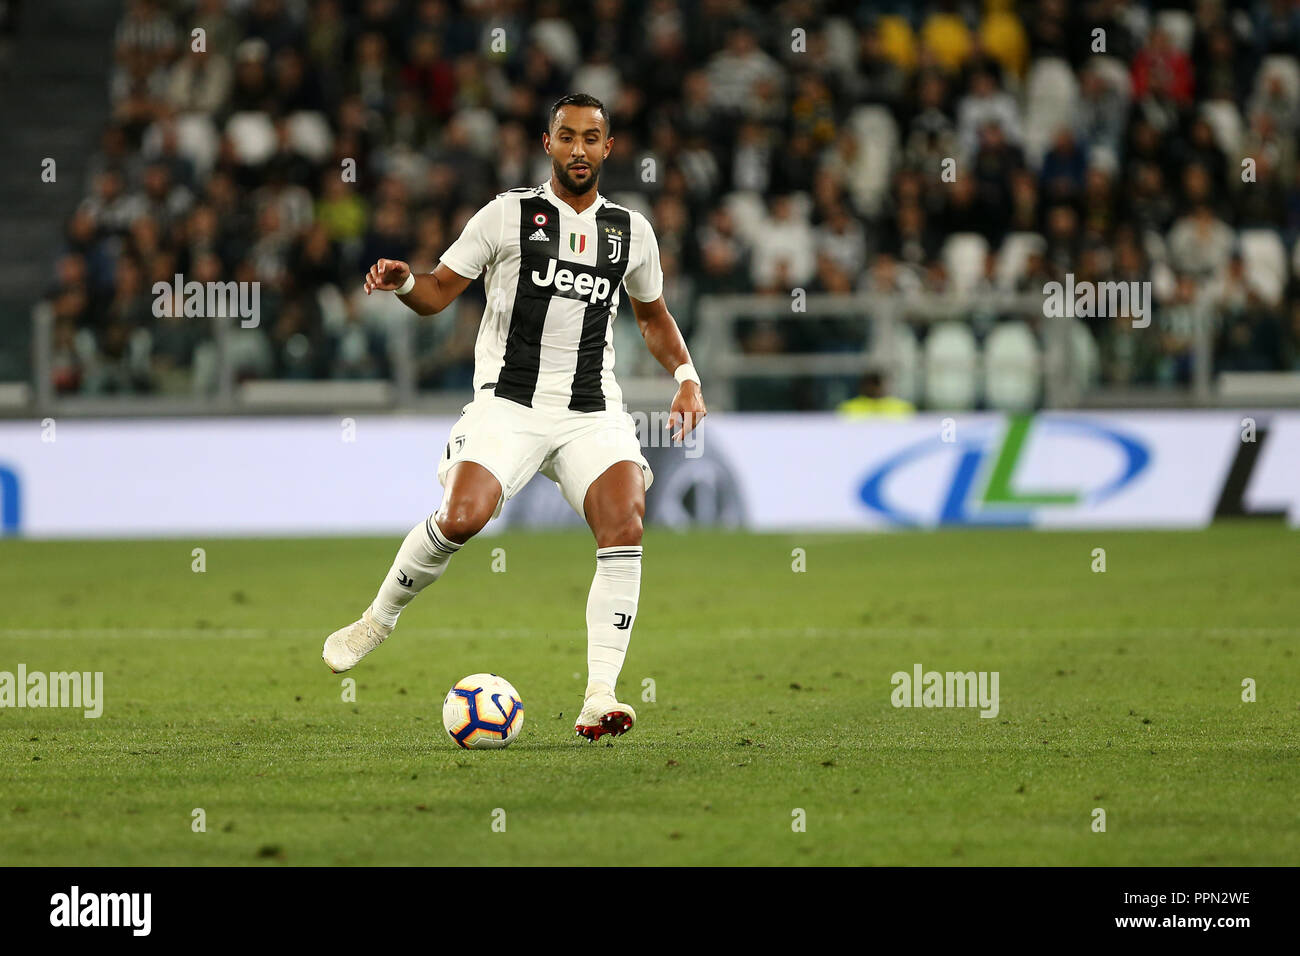 Torino, Italy. 26th September 2018. Medhi Benatia of Juventus FC in action during the Serie A football match between Juventus Fc and Bologna Fc. Credit: Marco Canoniero/Alamy Live News Stock Photo